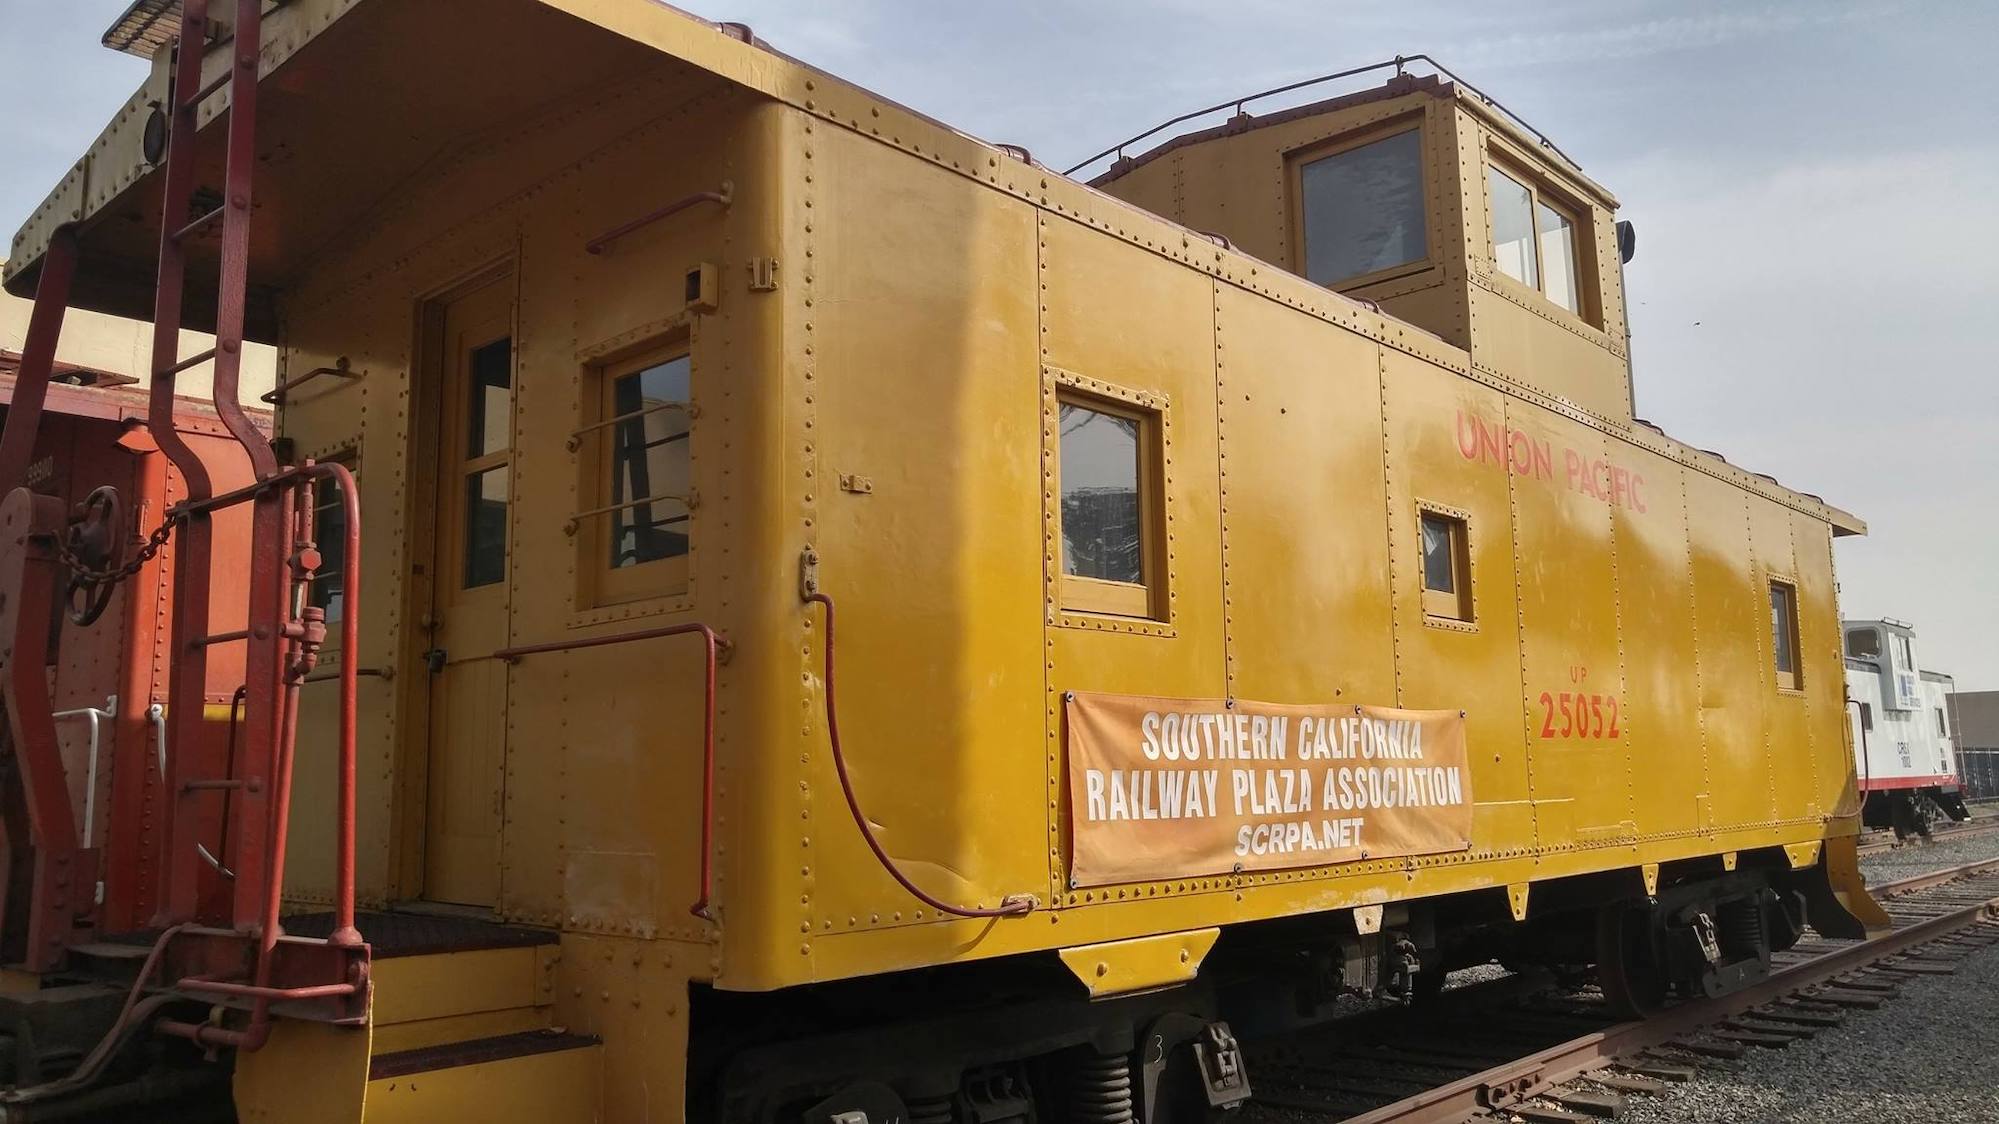 1942 Union Pacific Tall Cupola Steel Caboose at the Fullerton Train Museum